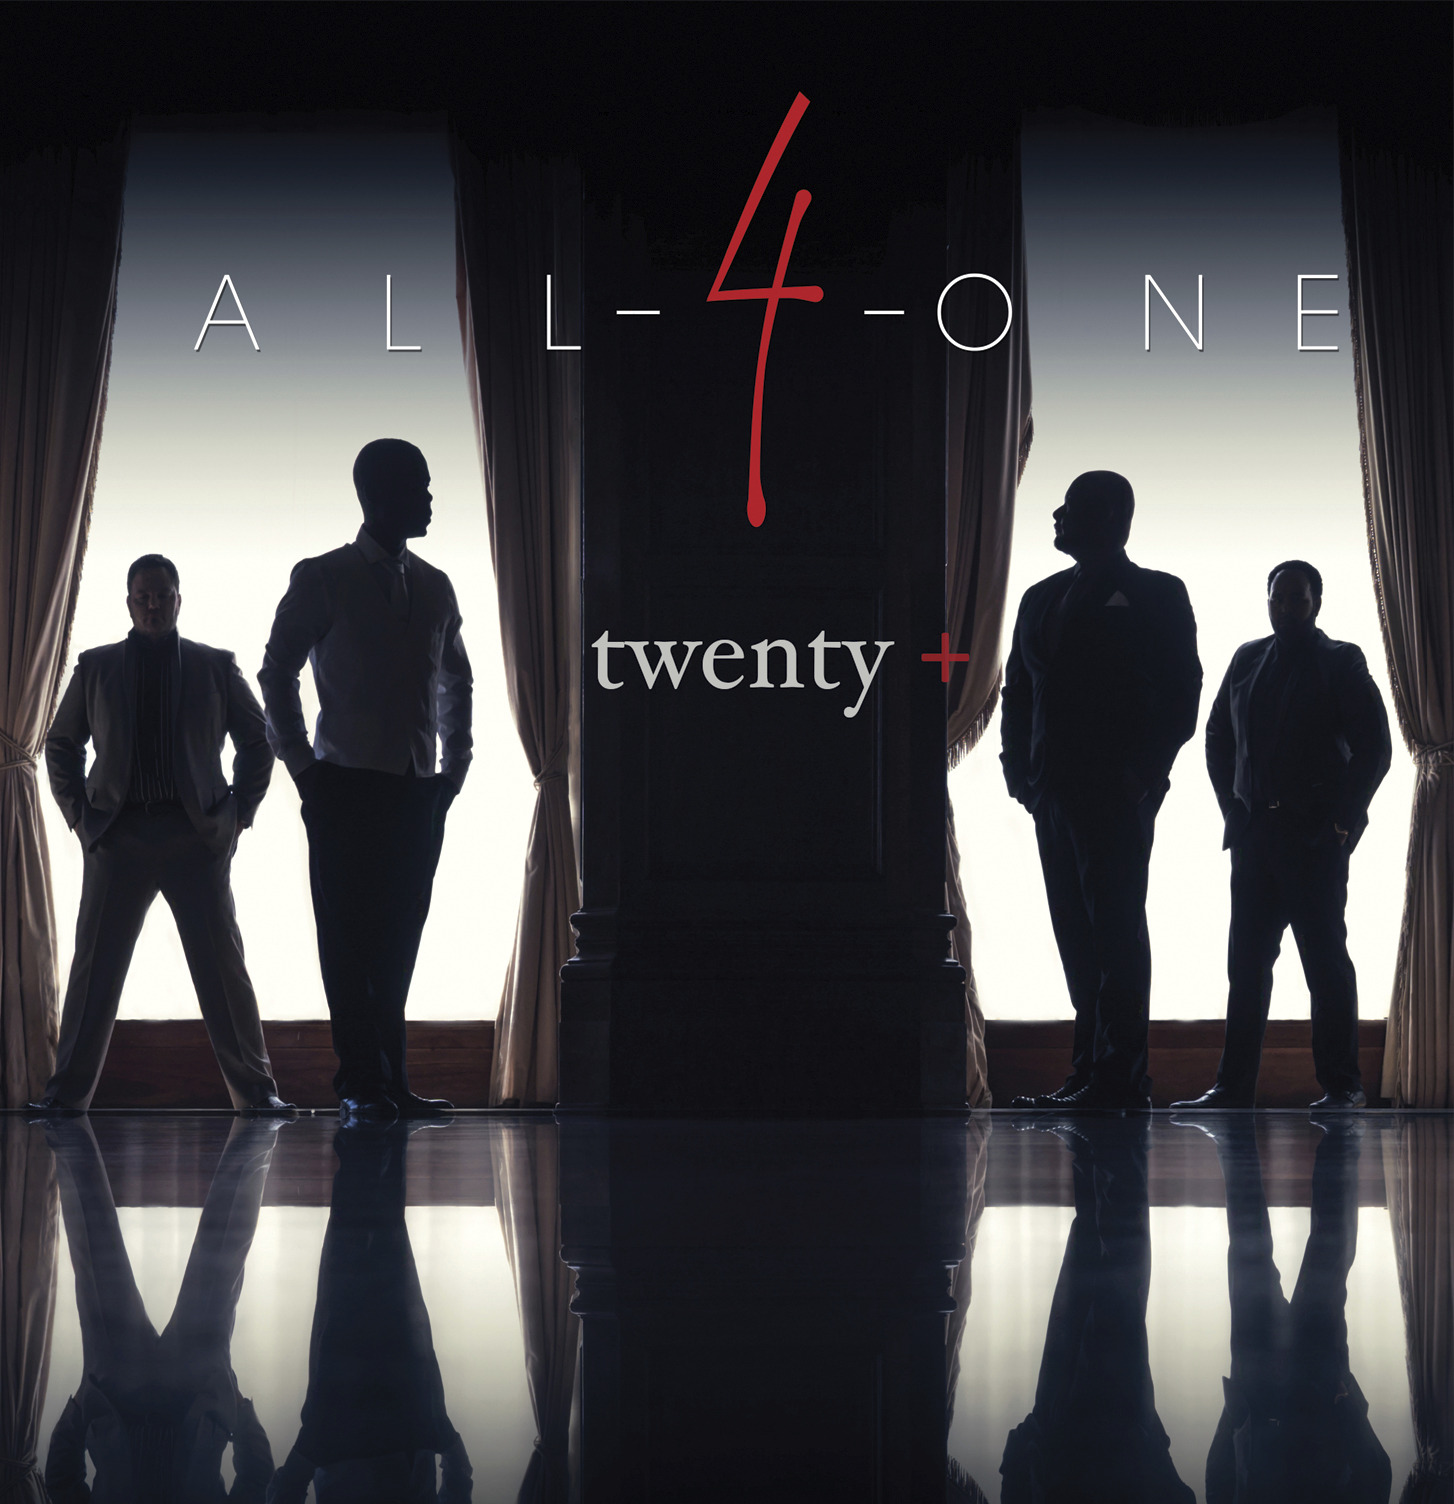 New Music: All 4 One “If We Fall”